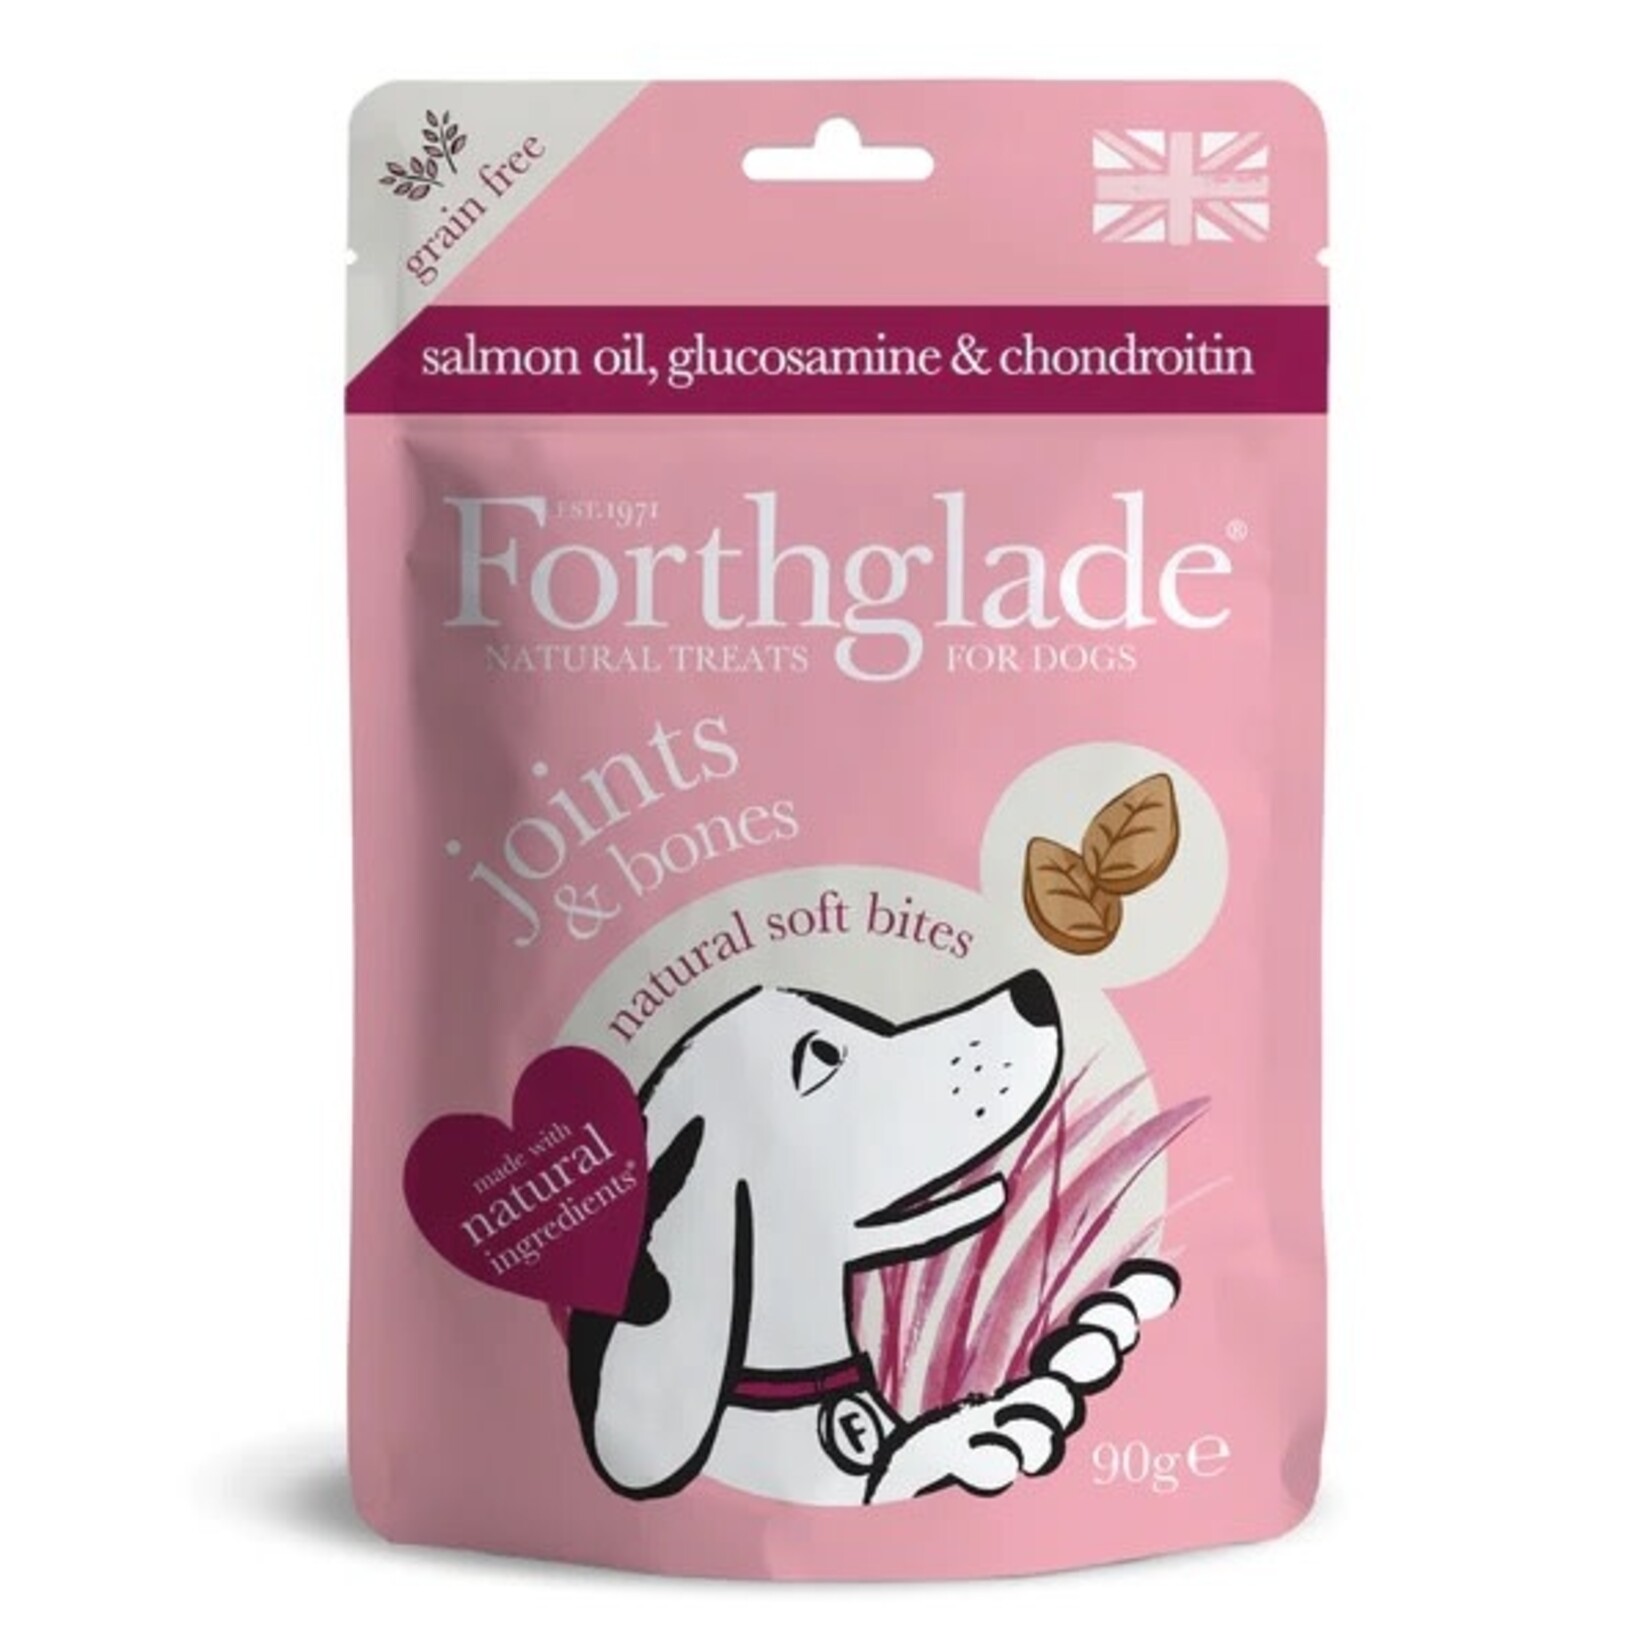 Forthglade Grain Free Joints & Bones Natural Soft Bites with Salmon Oil, Glucosamine & Chondroitin, 90g